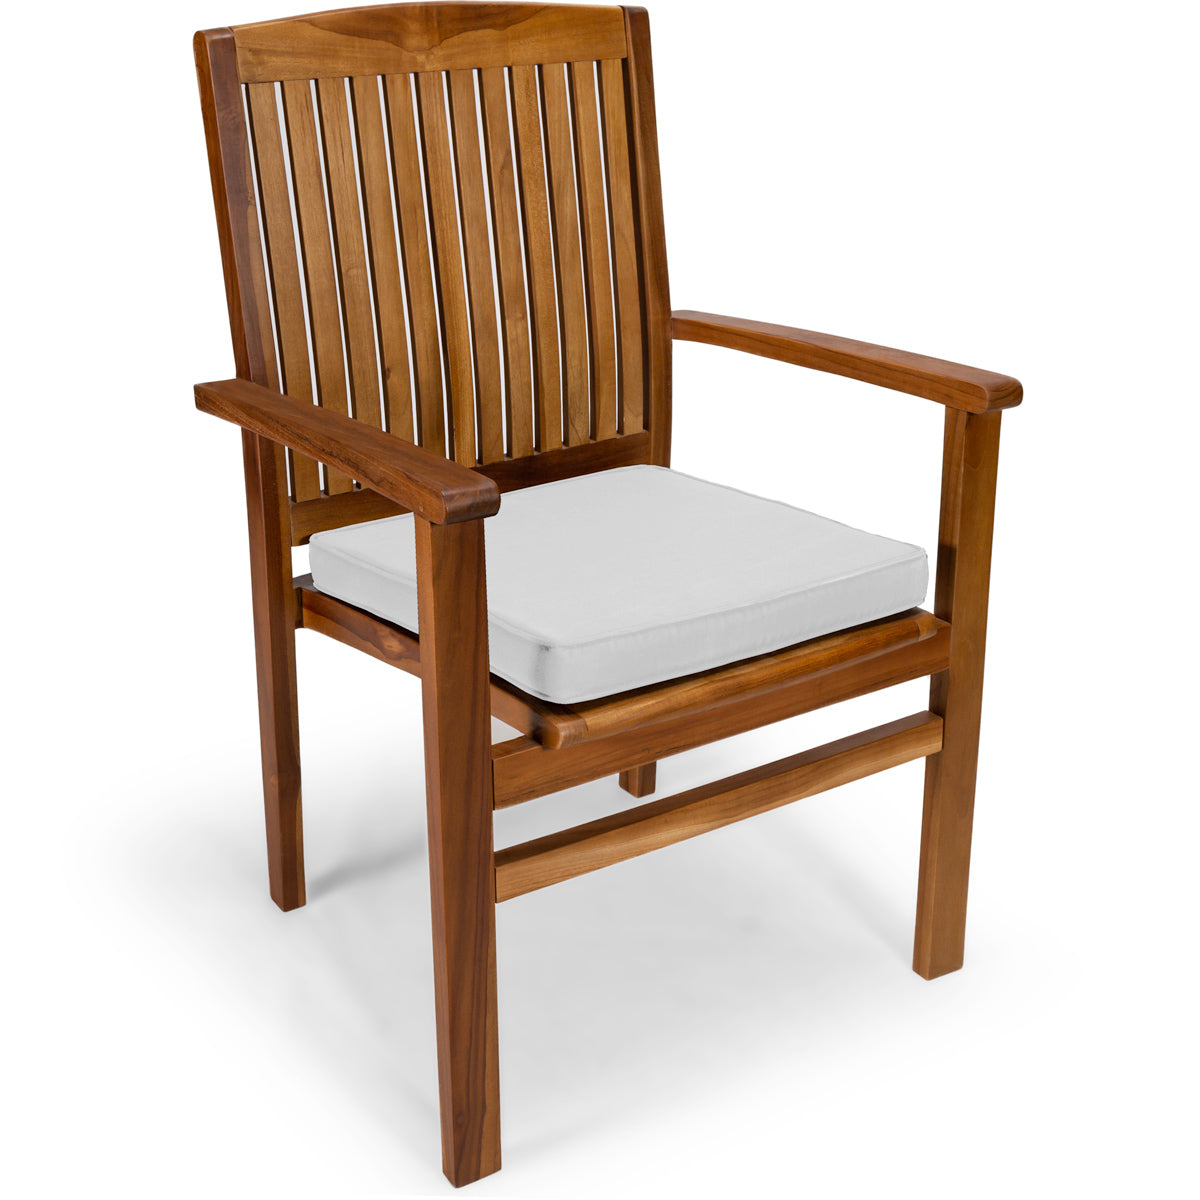 Teak Stacking Chair with White Cover